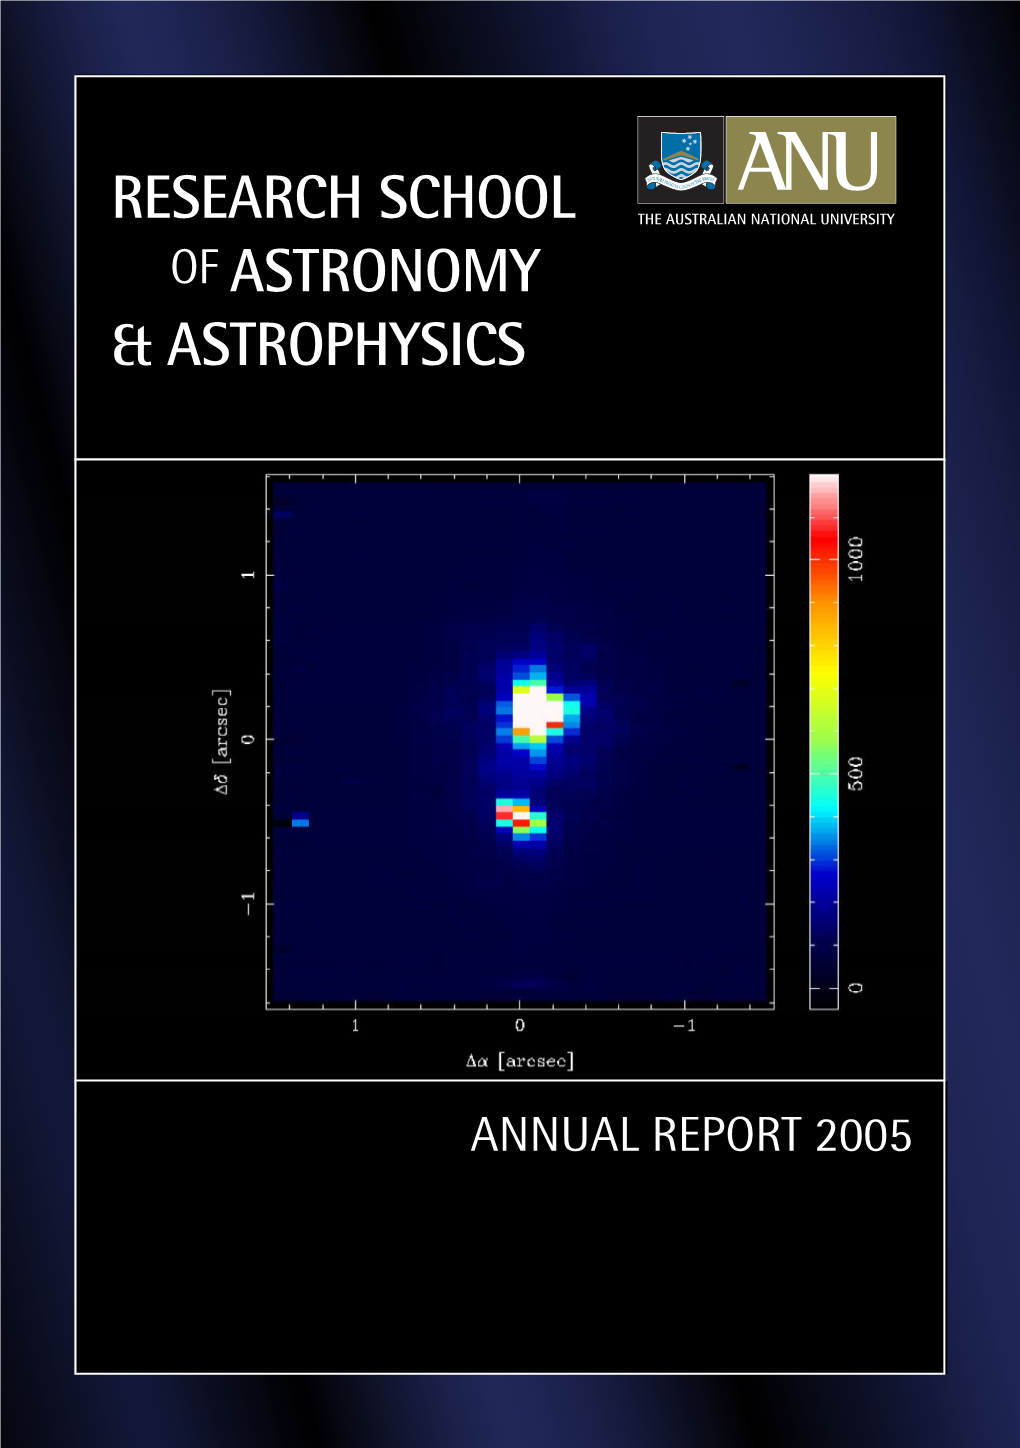 Reseach School of Astronomy and Astrophysics Annual Report 2005